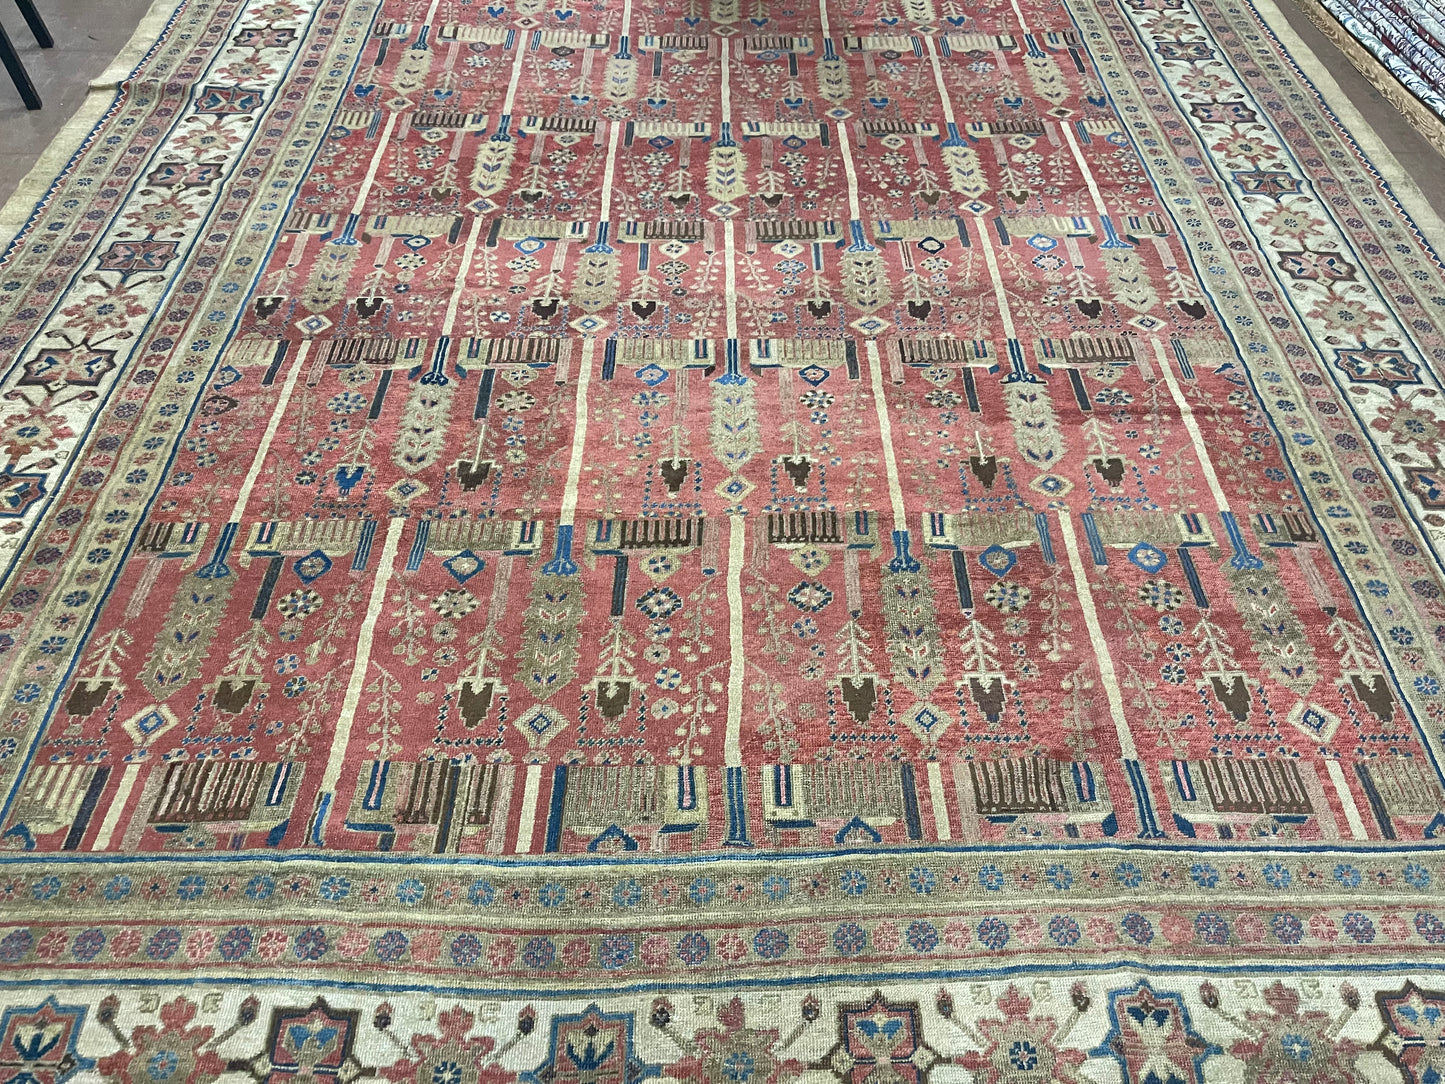 Detailed shot of the warm, rich red color dominating the palace-sized rug